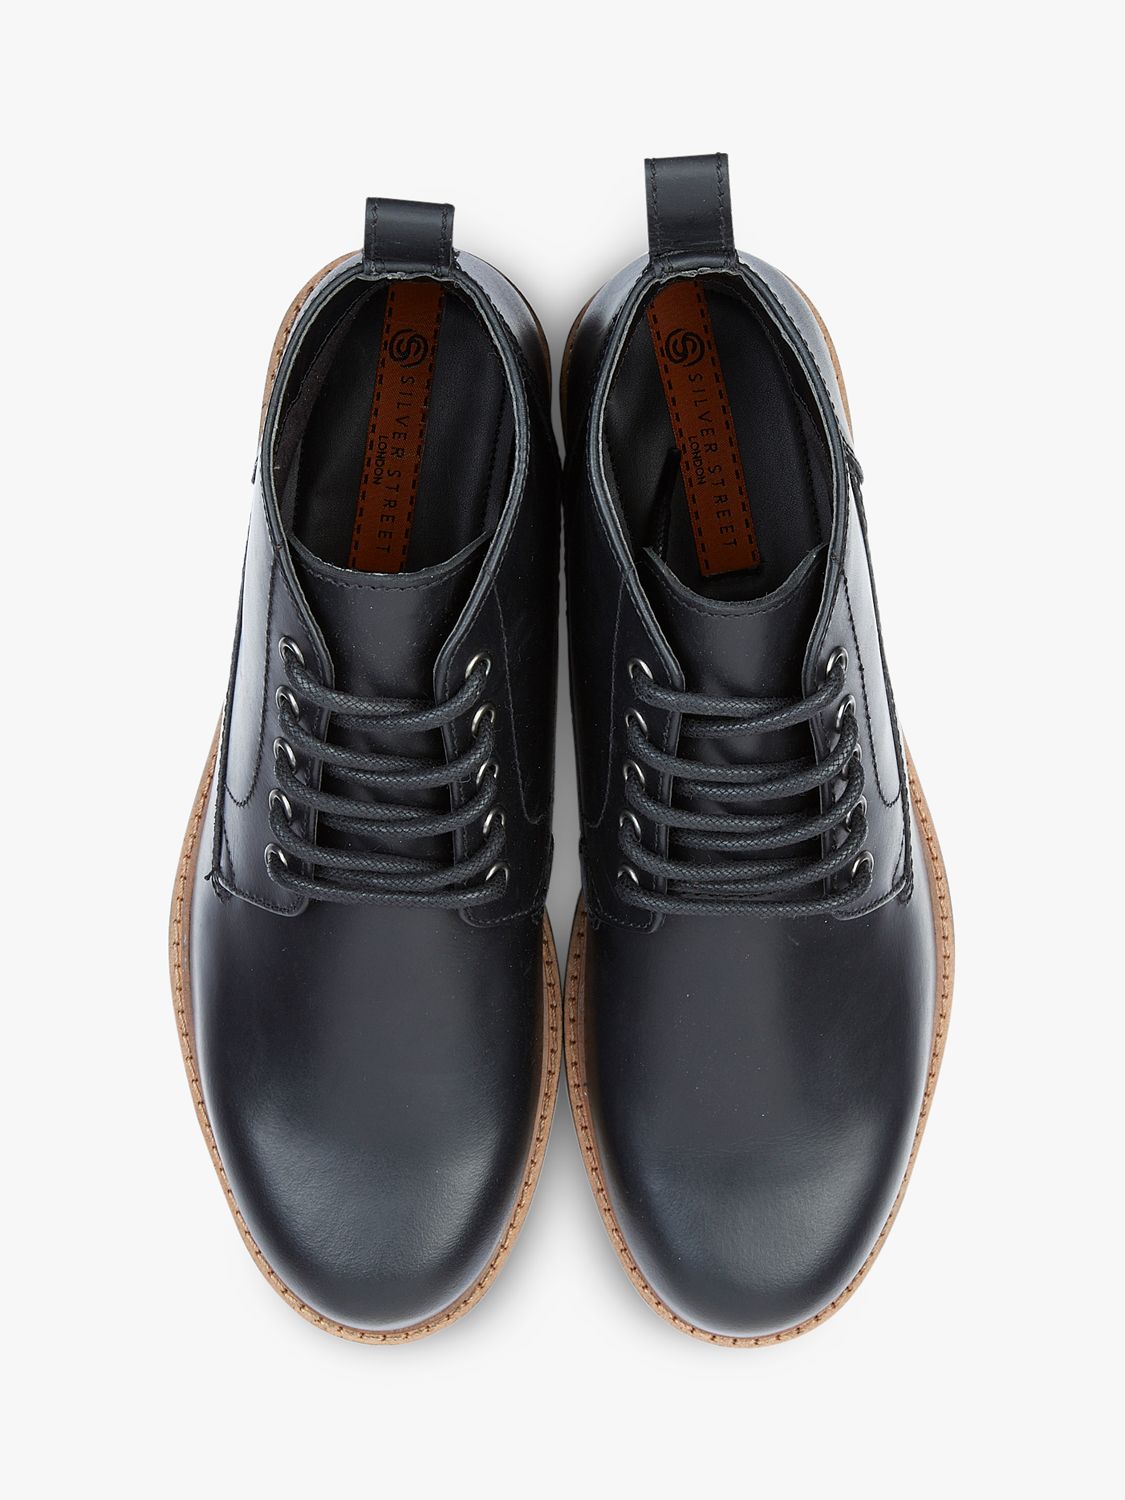 Silver Street London Alderman Lace Up Leather Chukka Boots, Black at ...